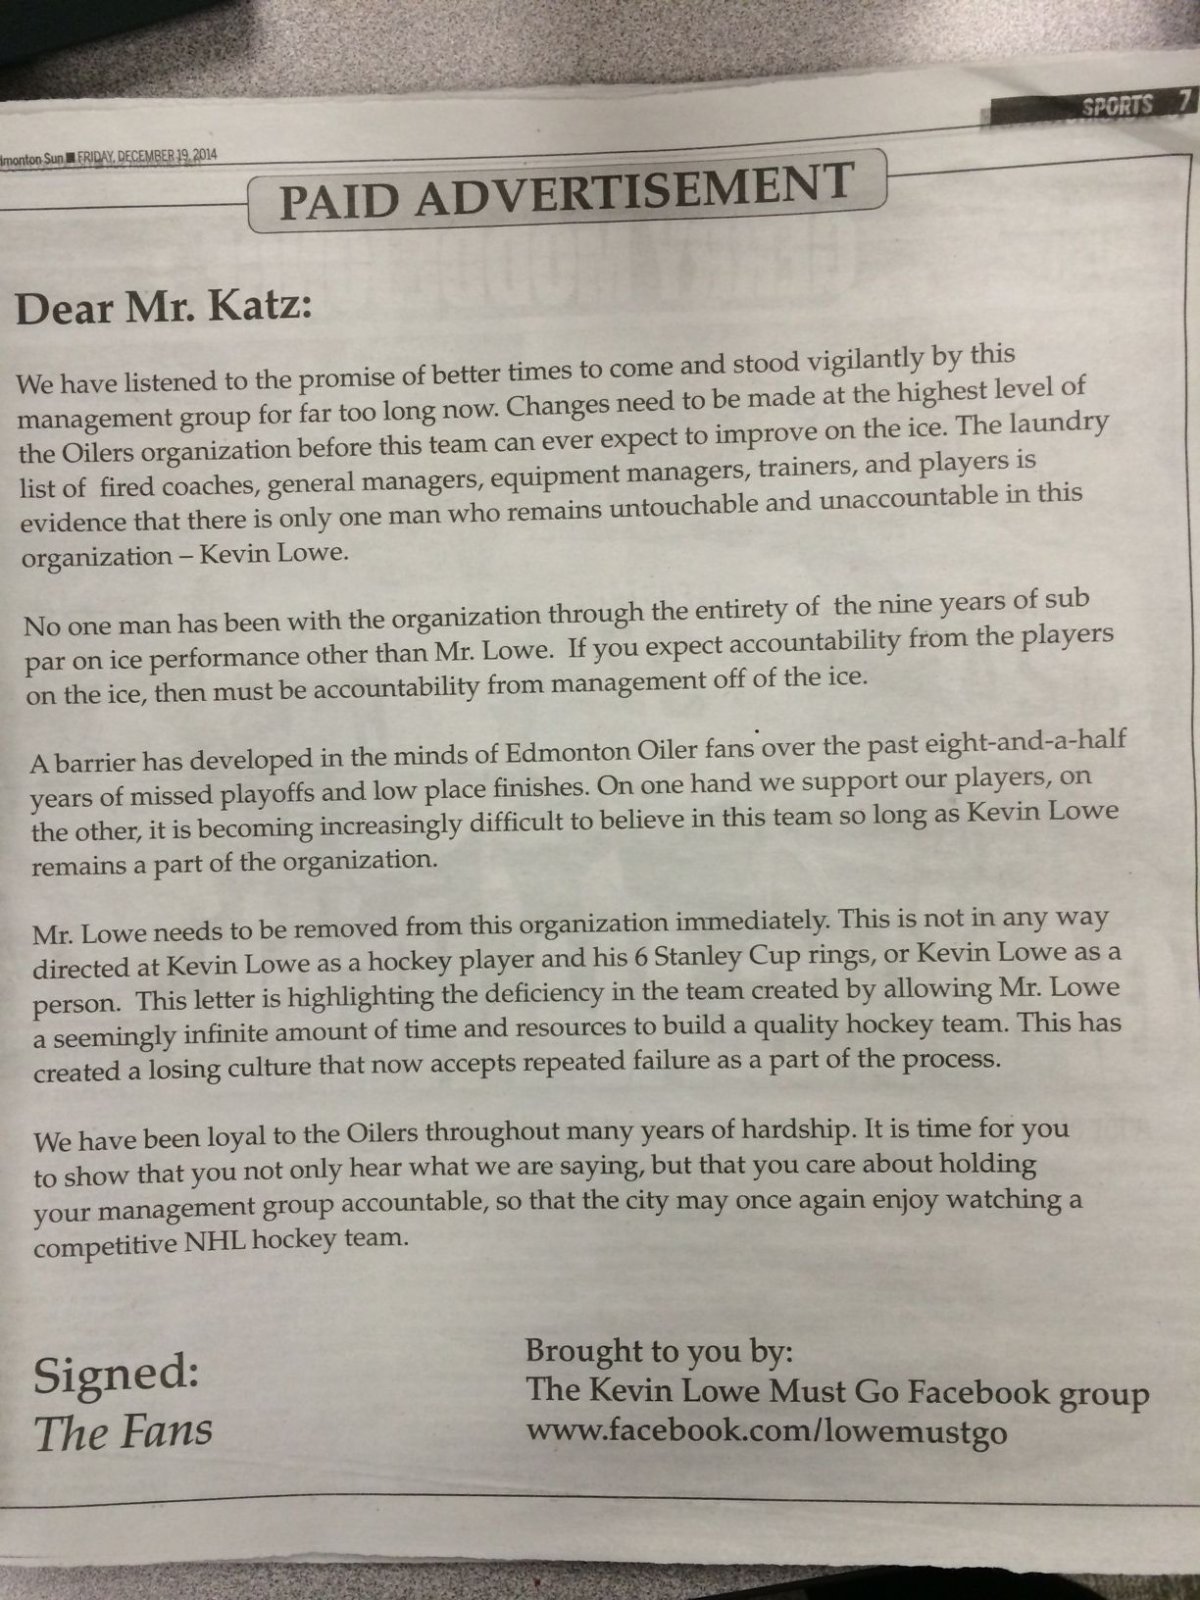 Kevin Lowe Must Go Facebook group's paid ad in the paper on Dec. 19, 2014.